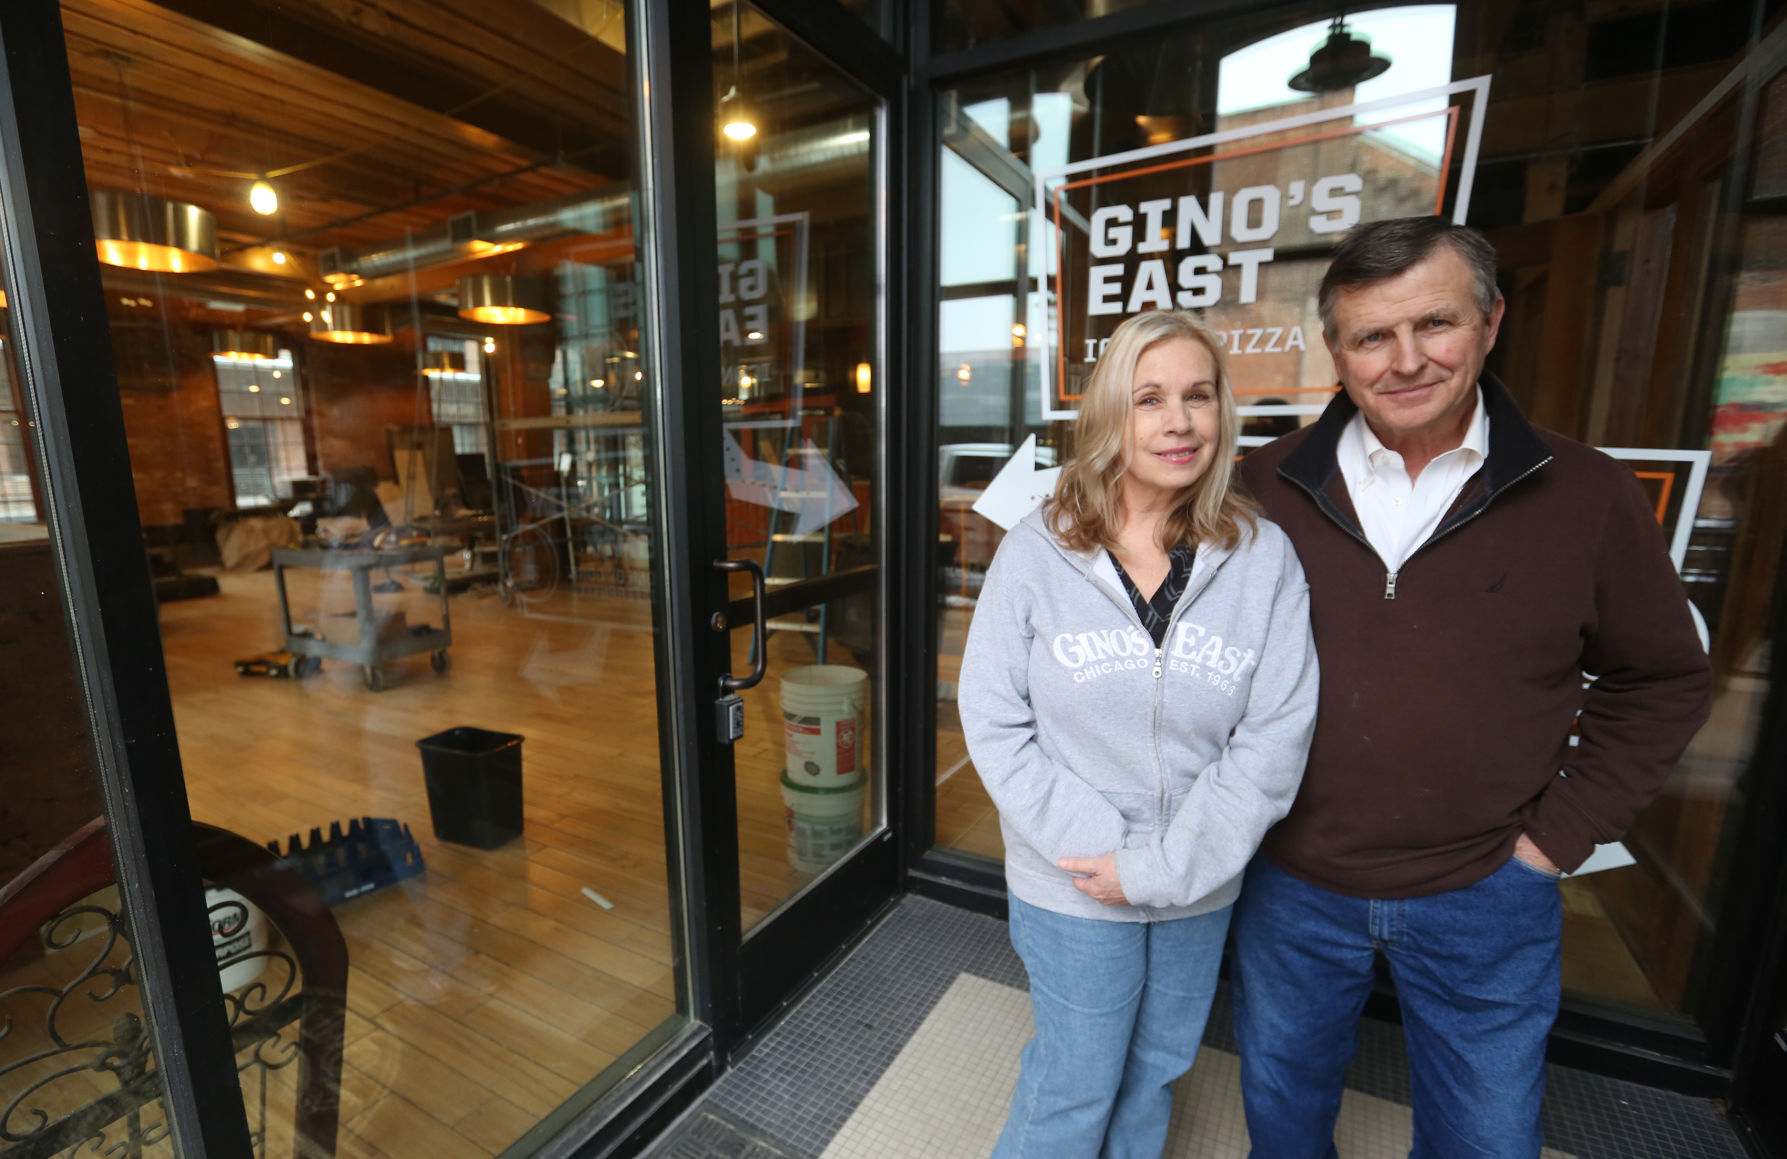 Dave and Kathleen Patterson are franchise operators of Gino’s East, which will be located in Novelty Iron Works in Dubuque’s Millwork District. A soft opening is being planned for mid-March. PHOTO CREDIT: JESSICA REILLY